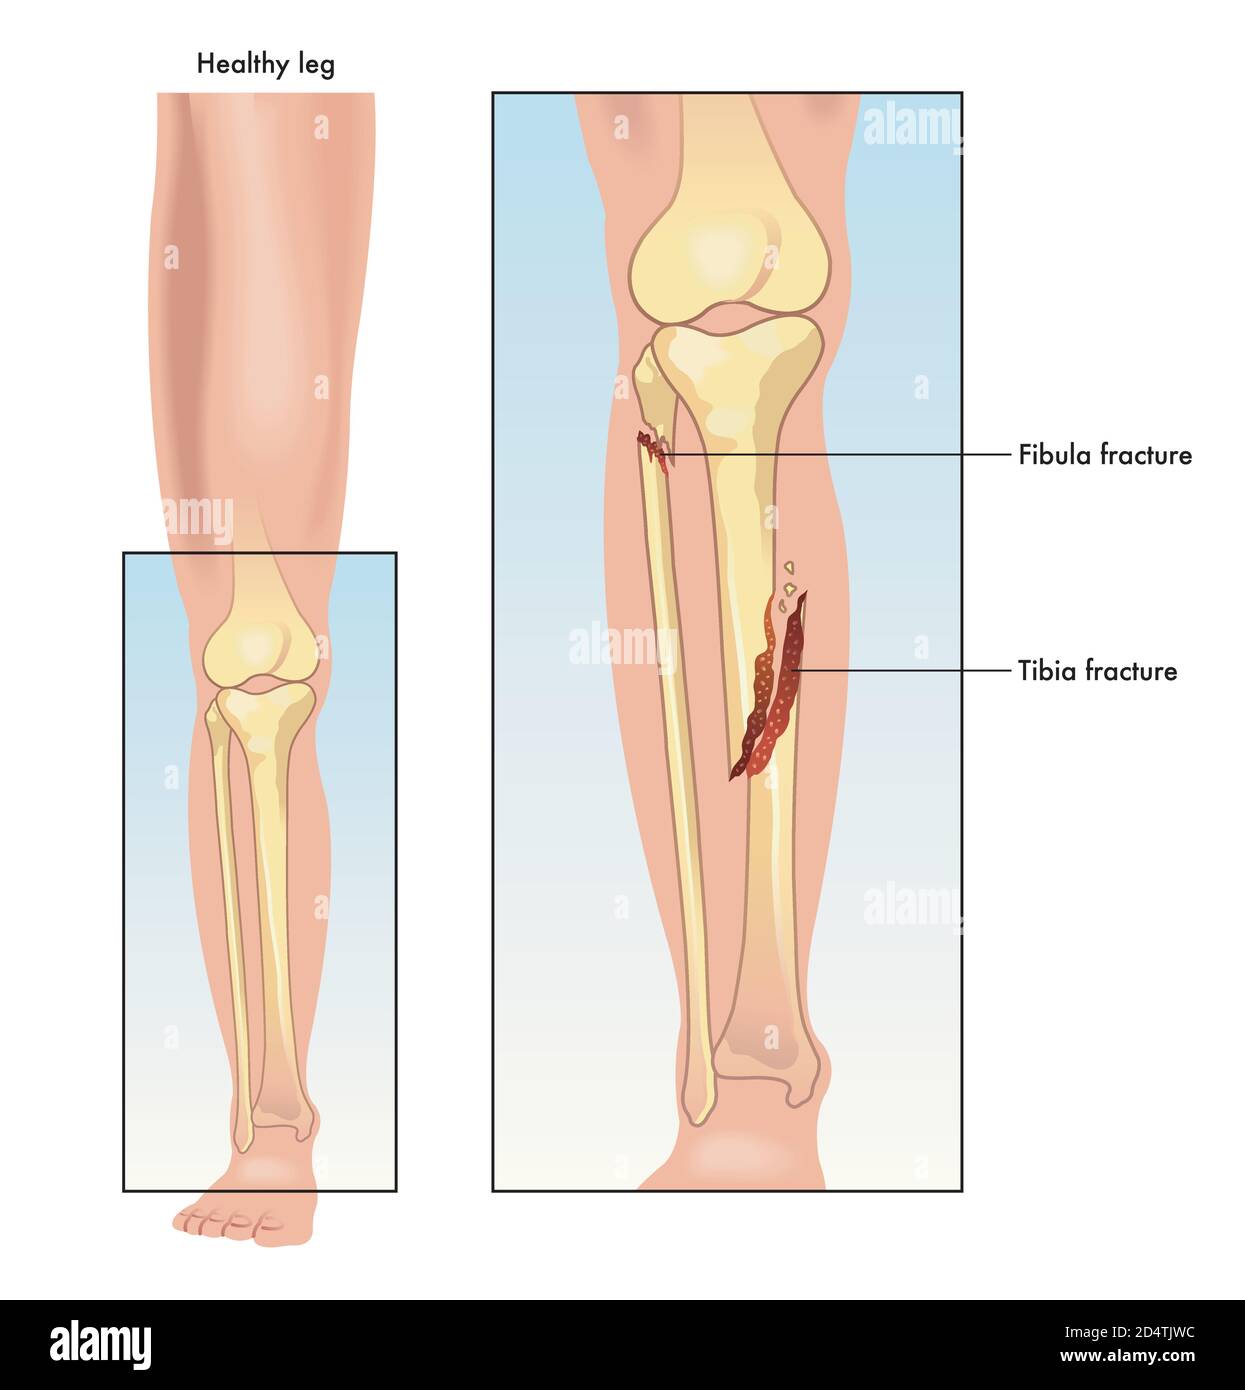 Medical illustration comparing a healthy leg to one with a fractured tibia and fibula. Stock Vector